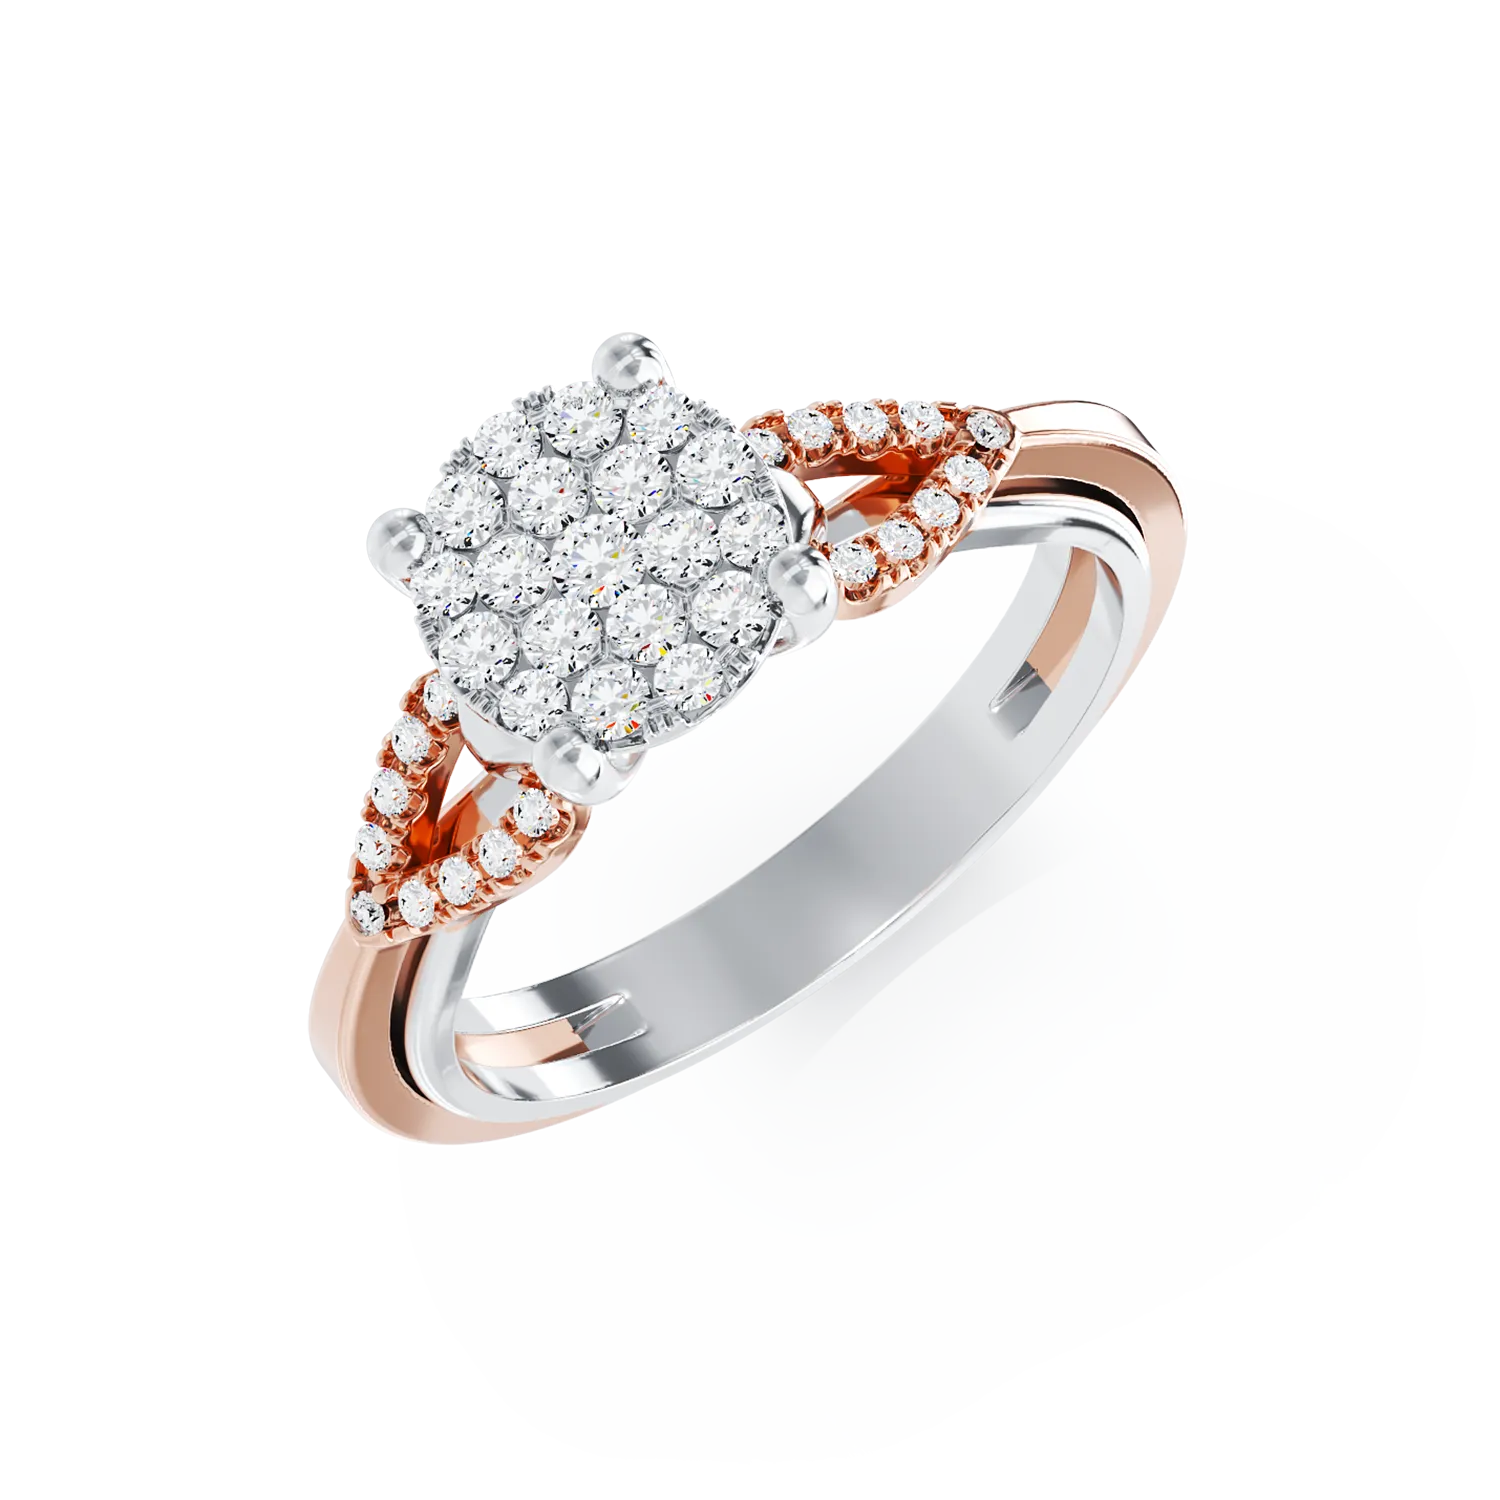 18K white-rose gold engagement ring with 0.33ct diamonds